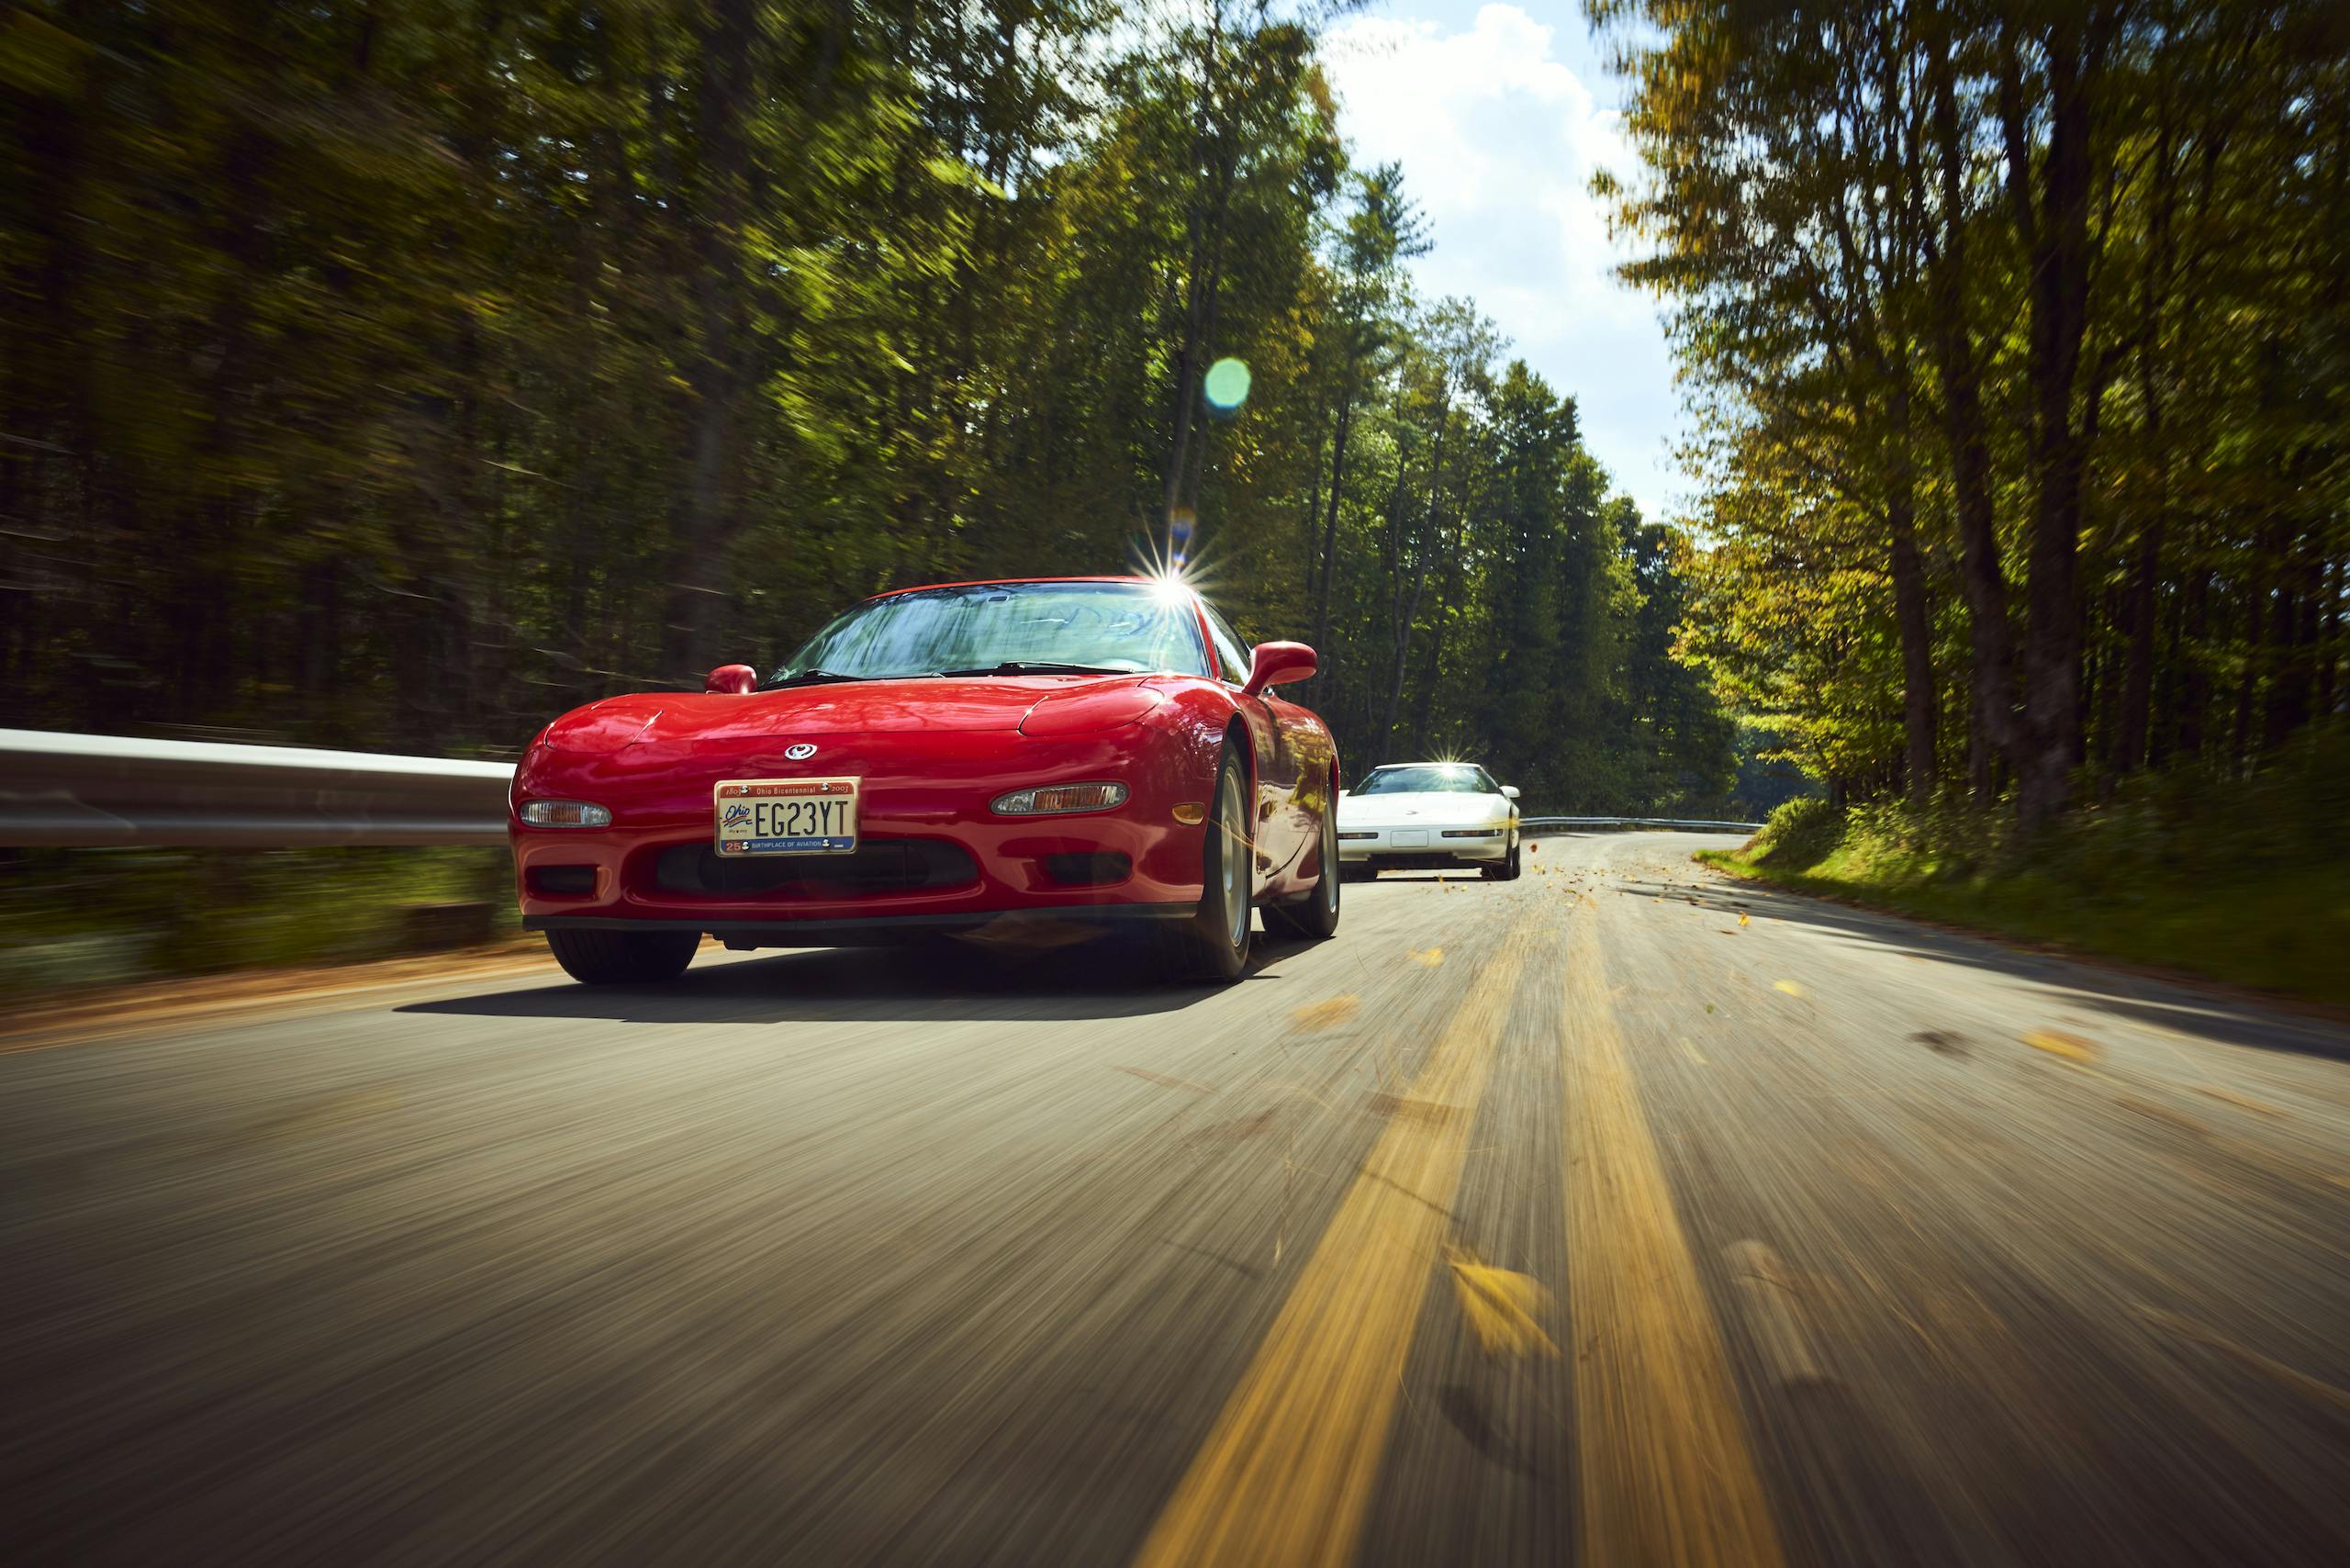 Mazda RX-7 with C4 Corvette trailing dynamic road action front